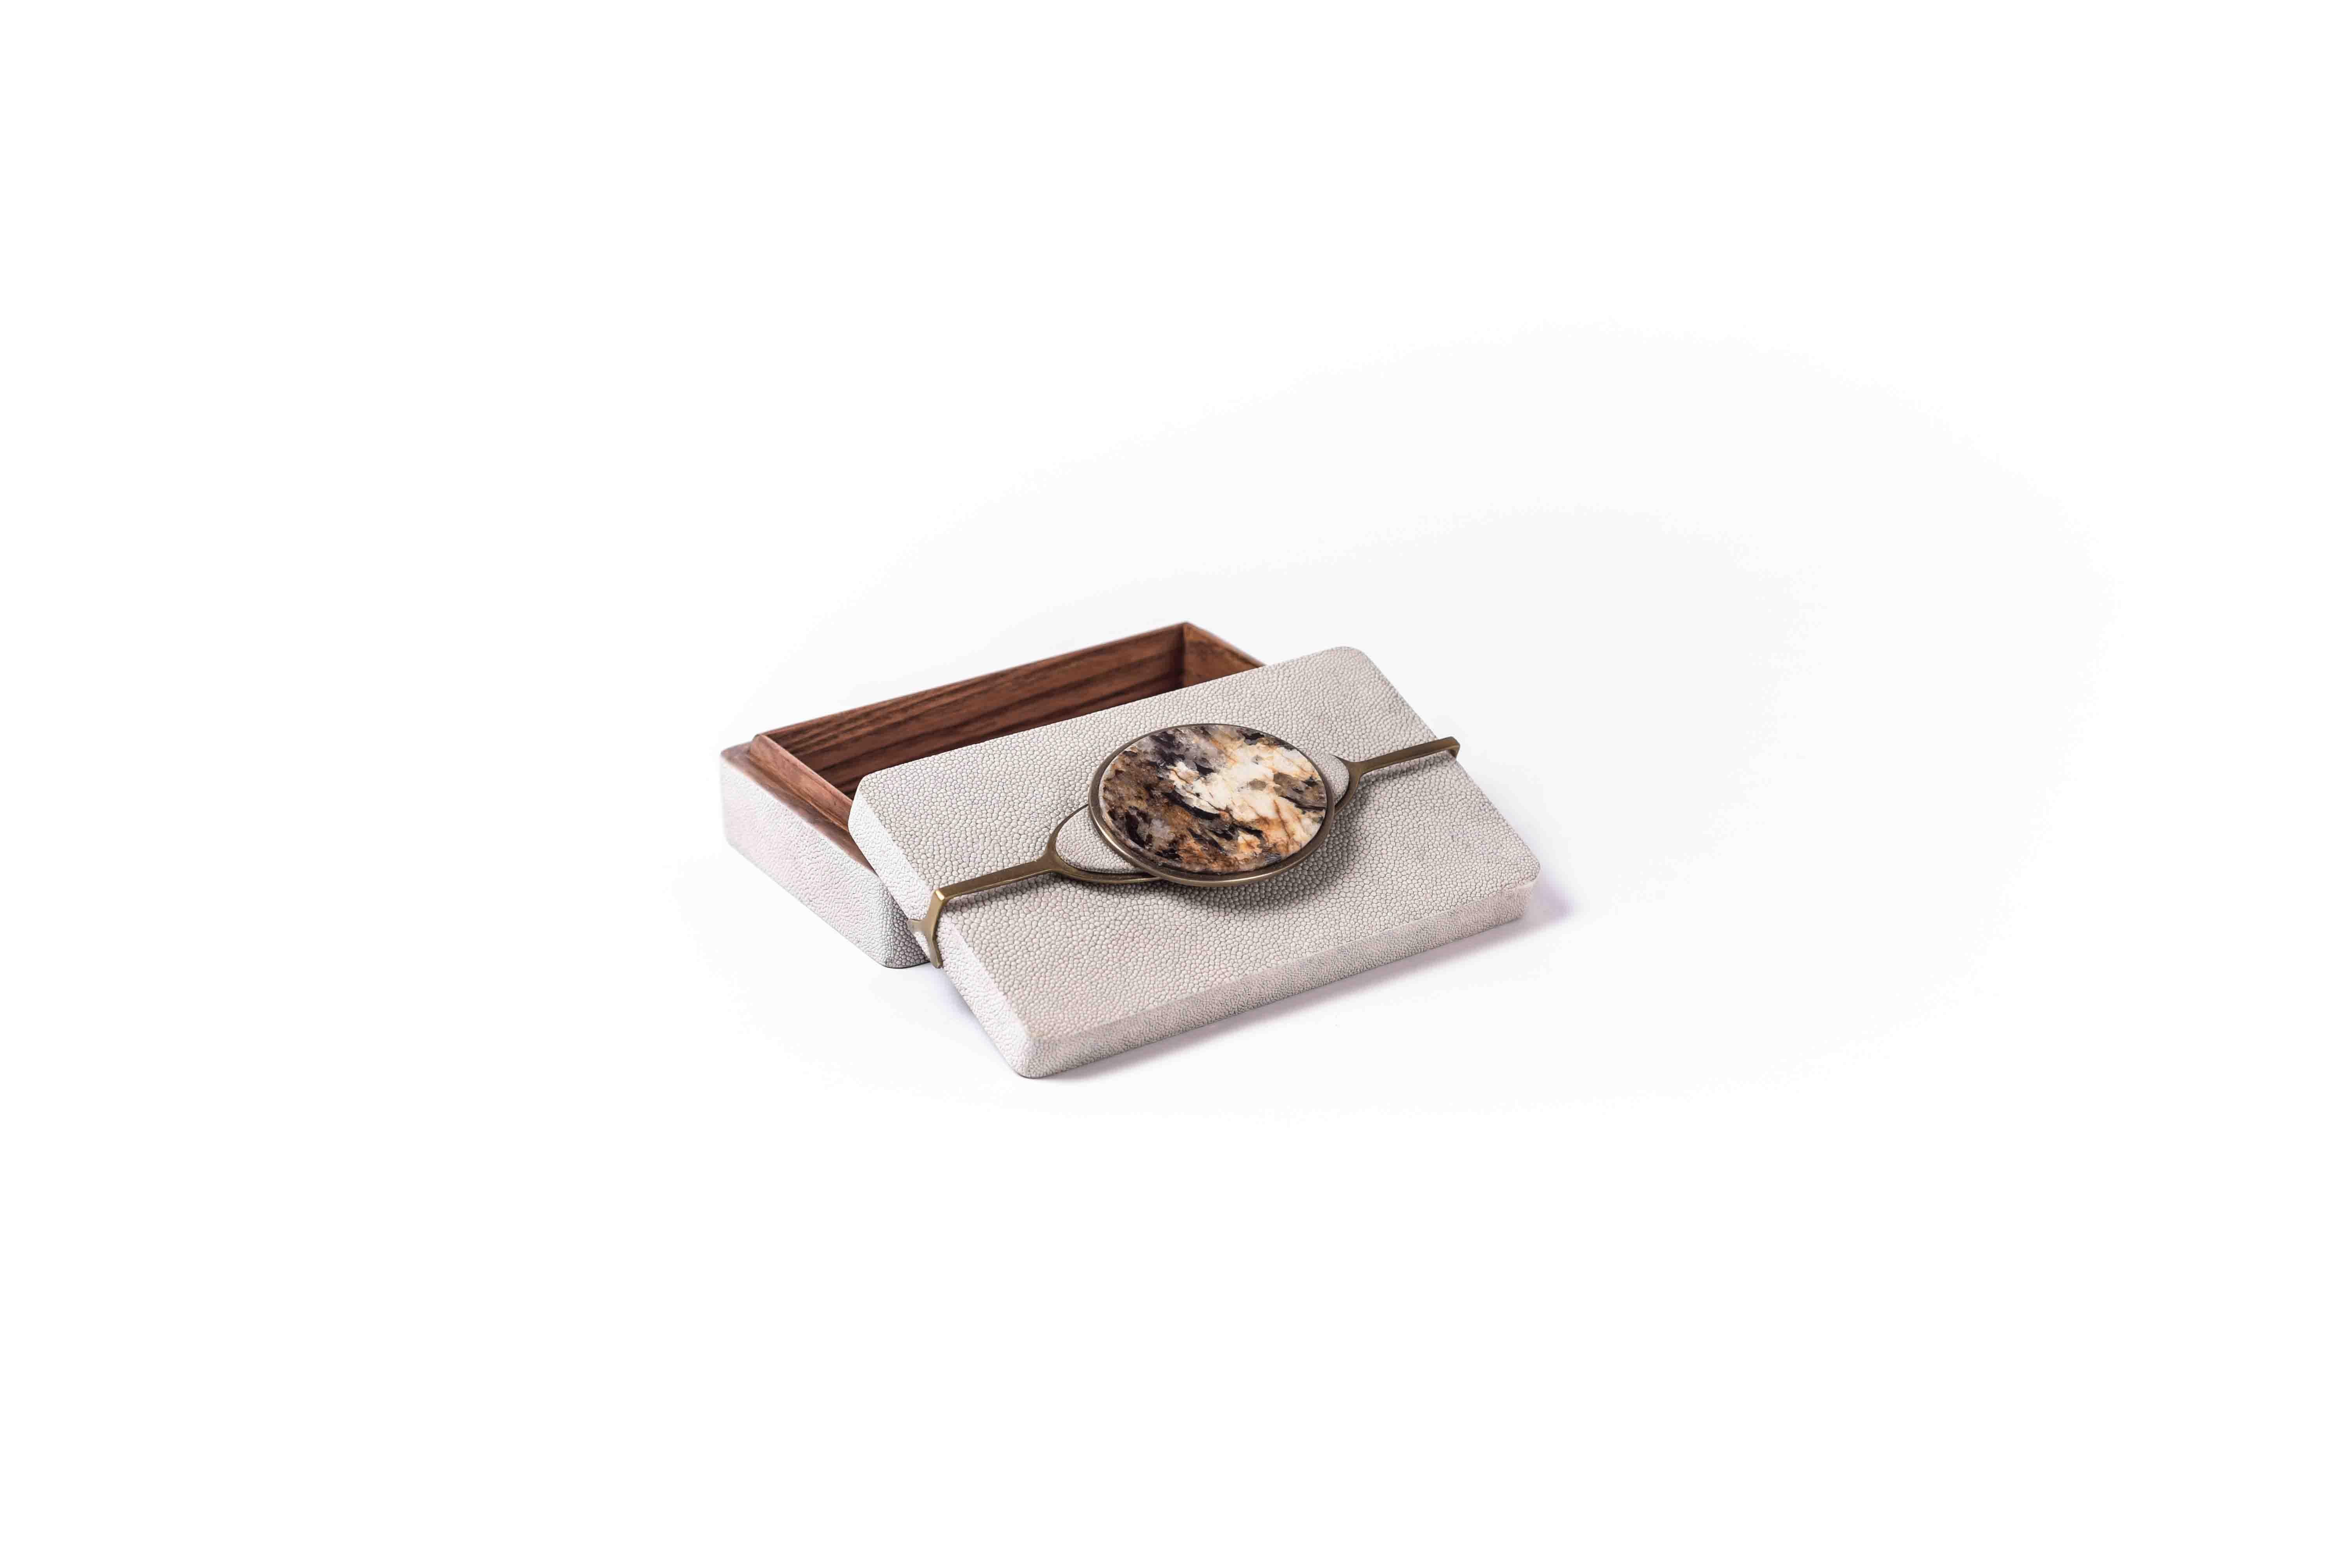 Contemporary Two Shagreen Boxes with a Semi Precious Knob and Brass Details by Kifu Paris